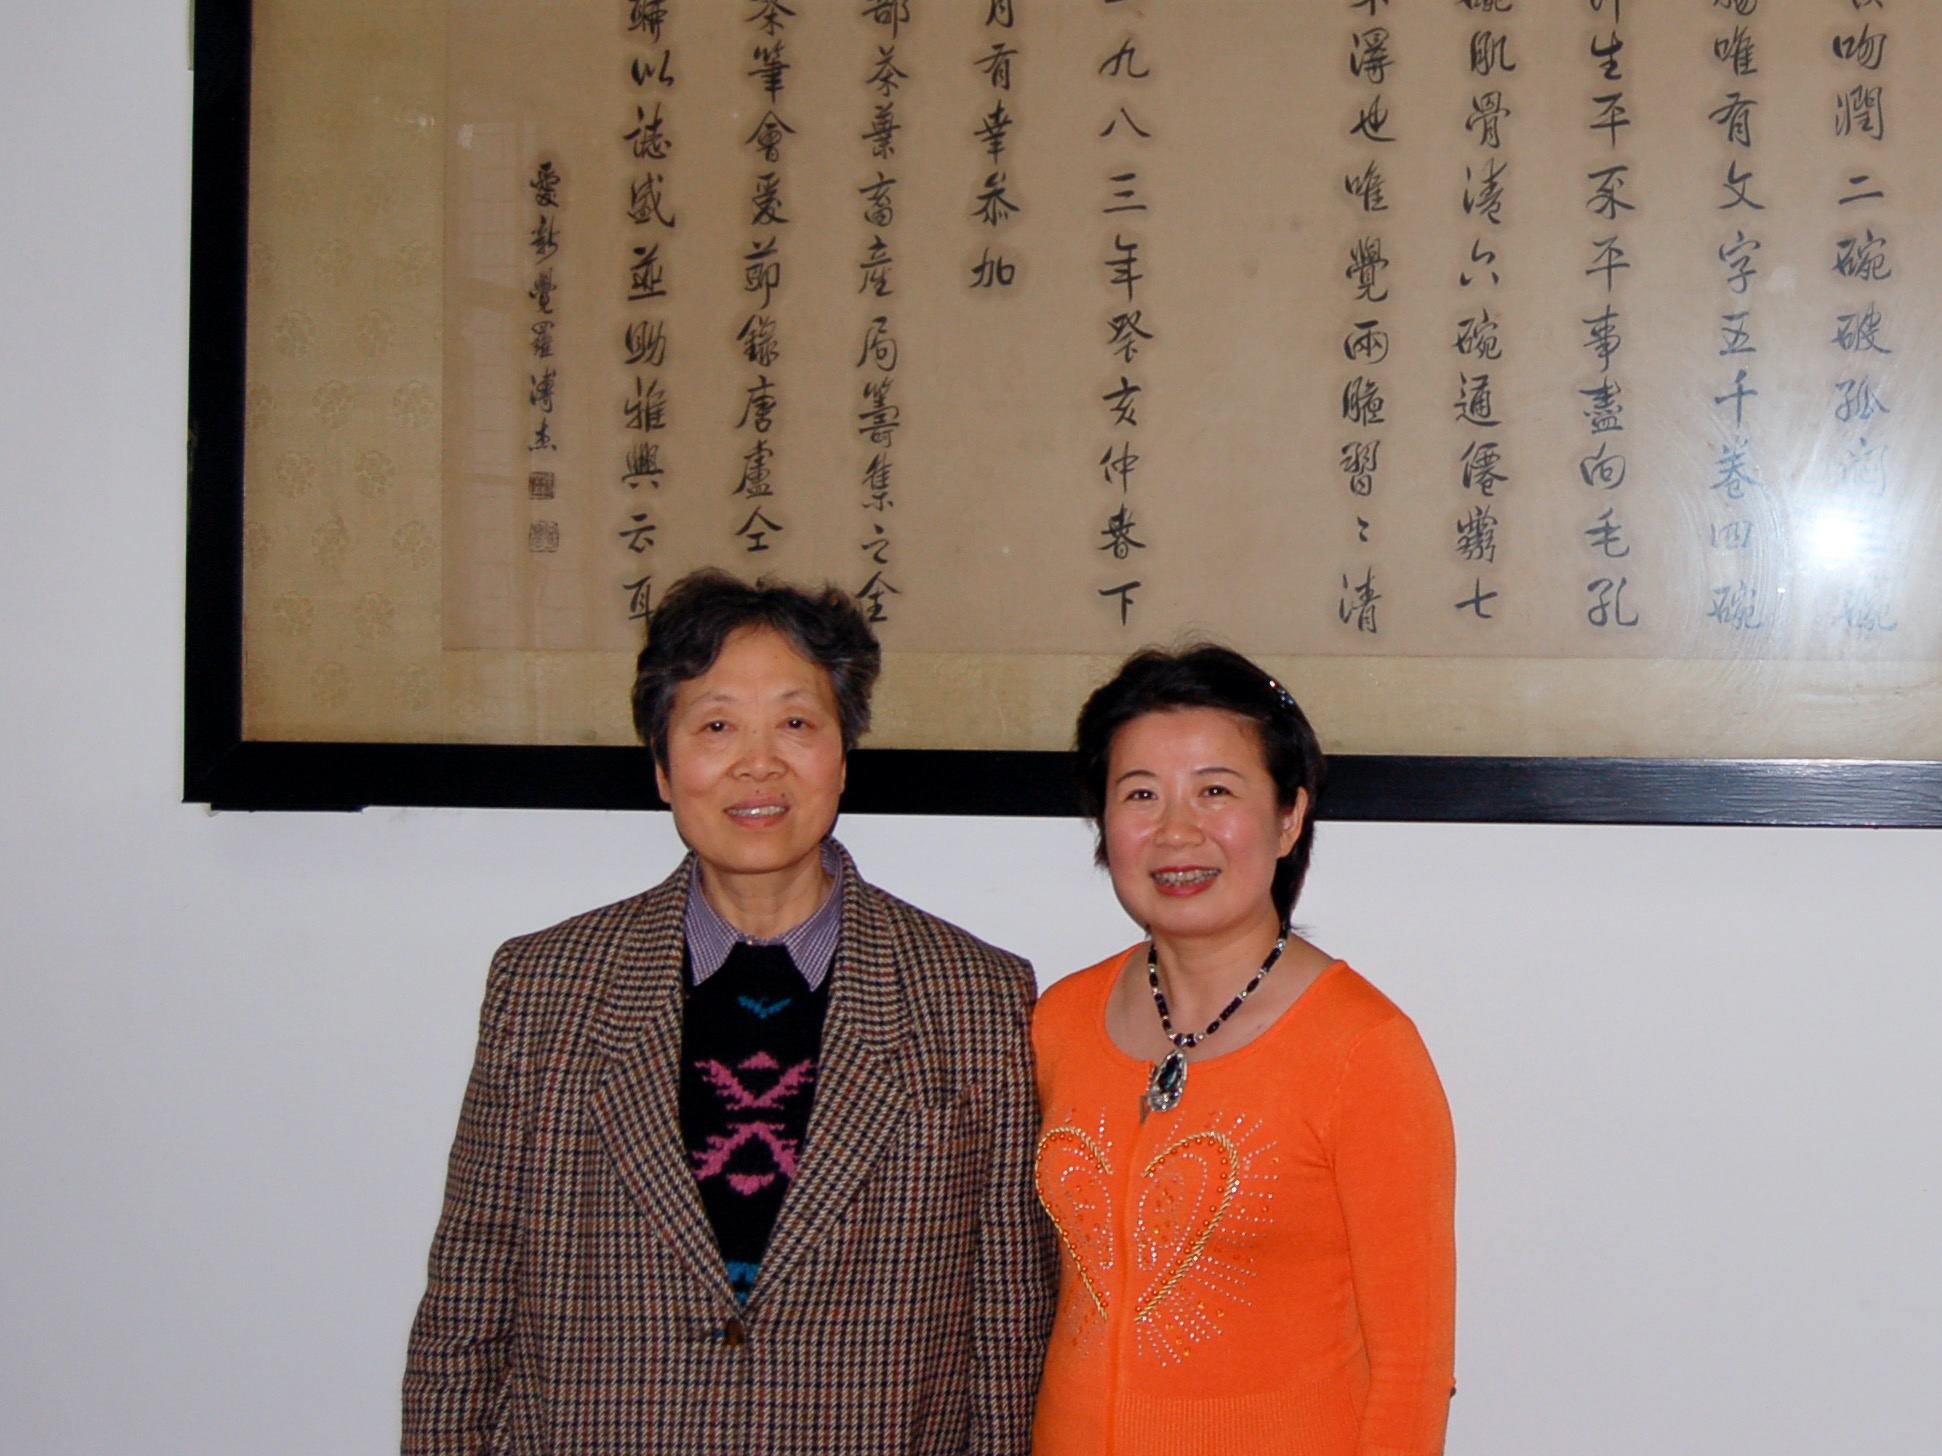 Two people standing in front of a large piece of framed calligraphic art, smiling.